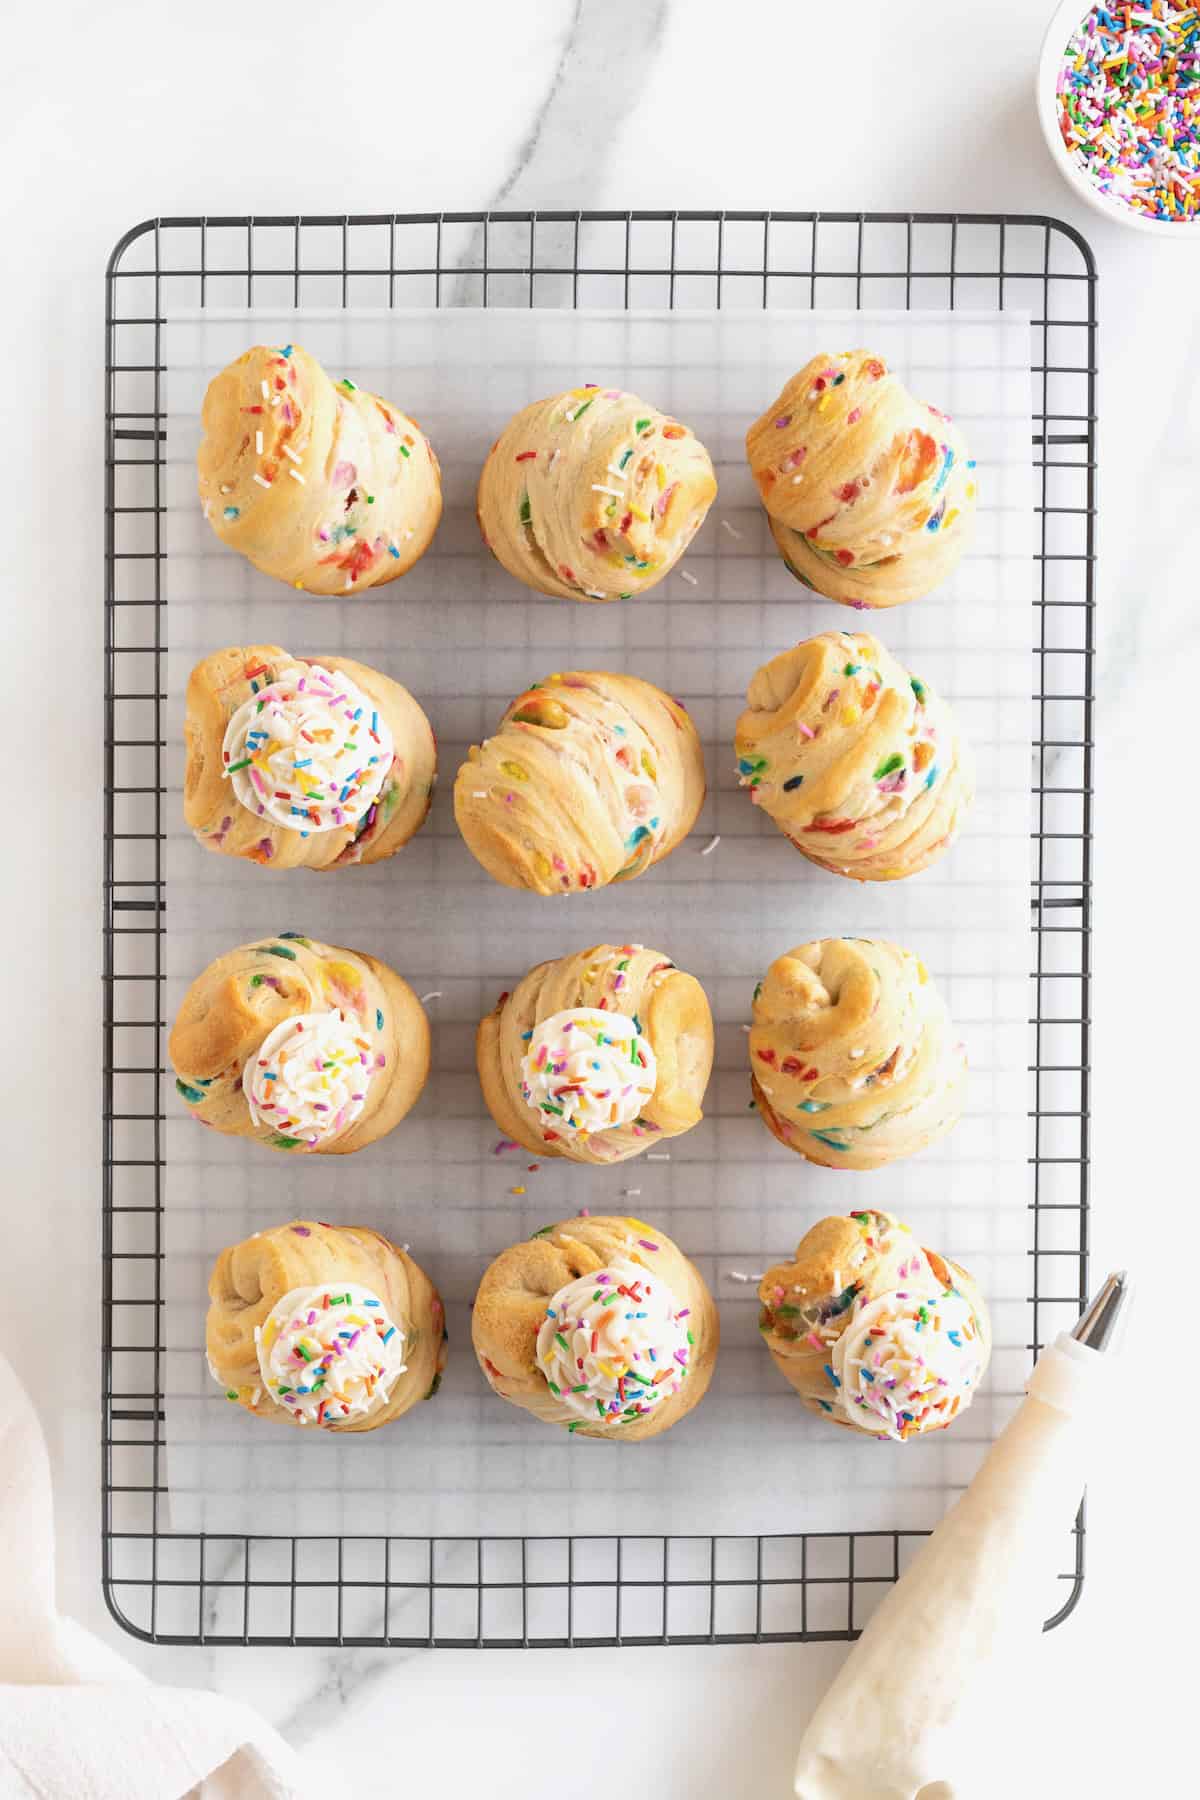 12 cruffins topped with icing and sprinkles on a parchment lined metal cooling rack.